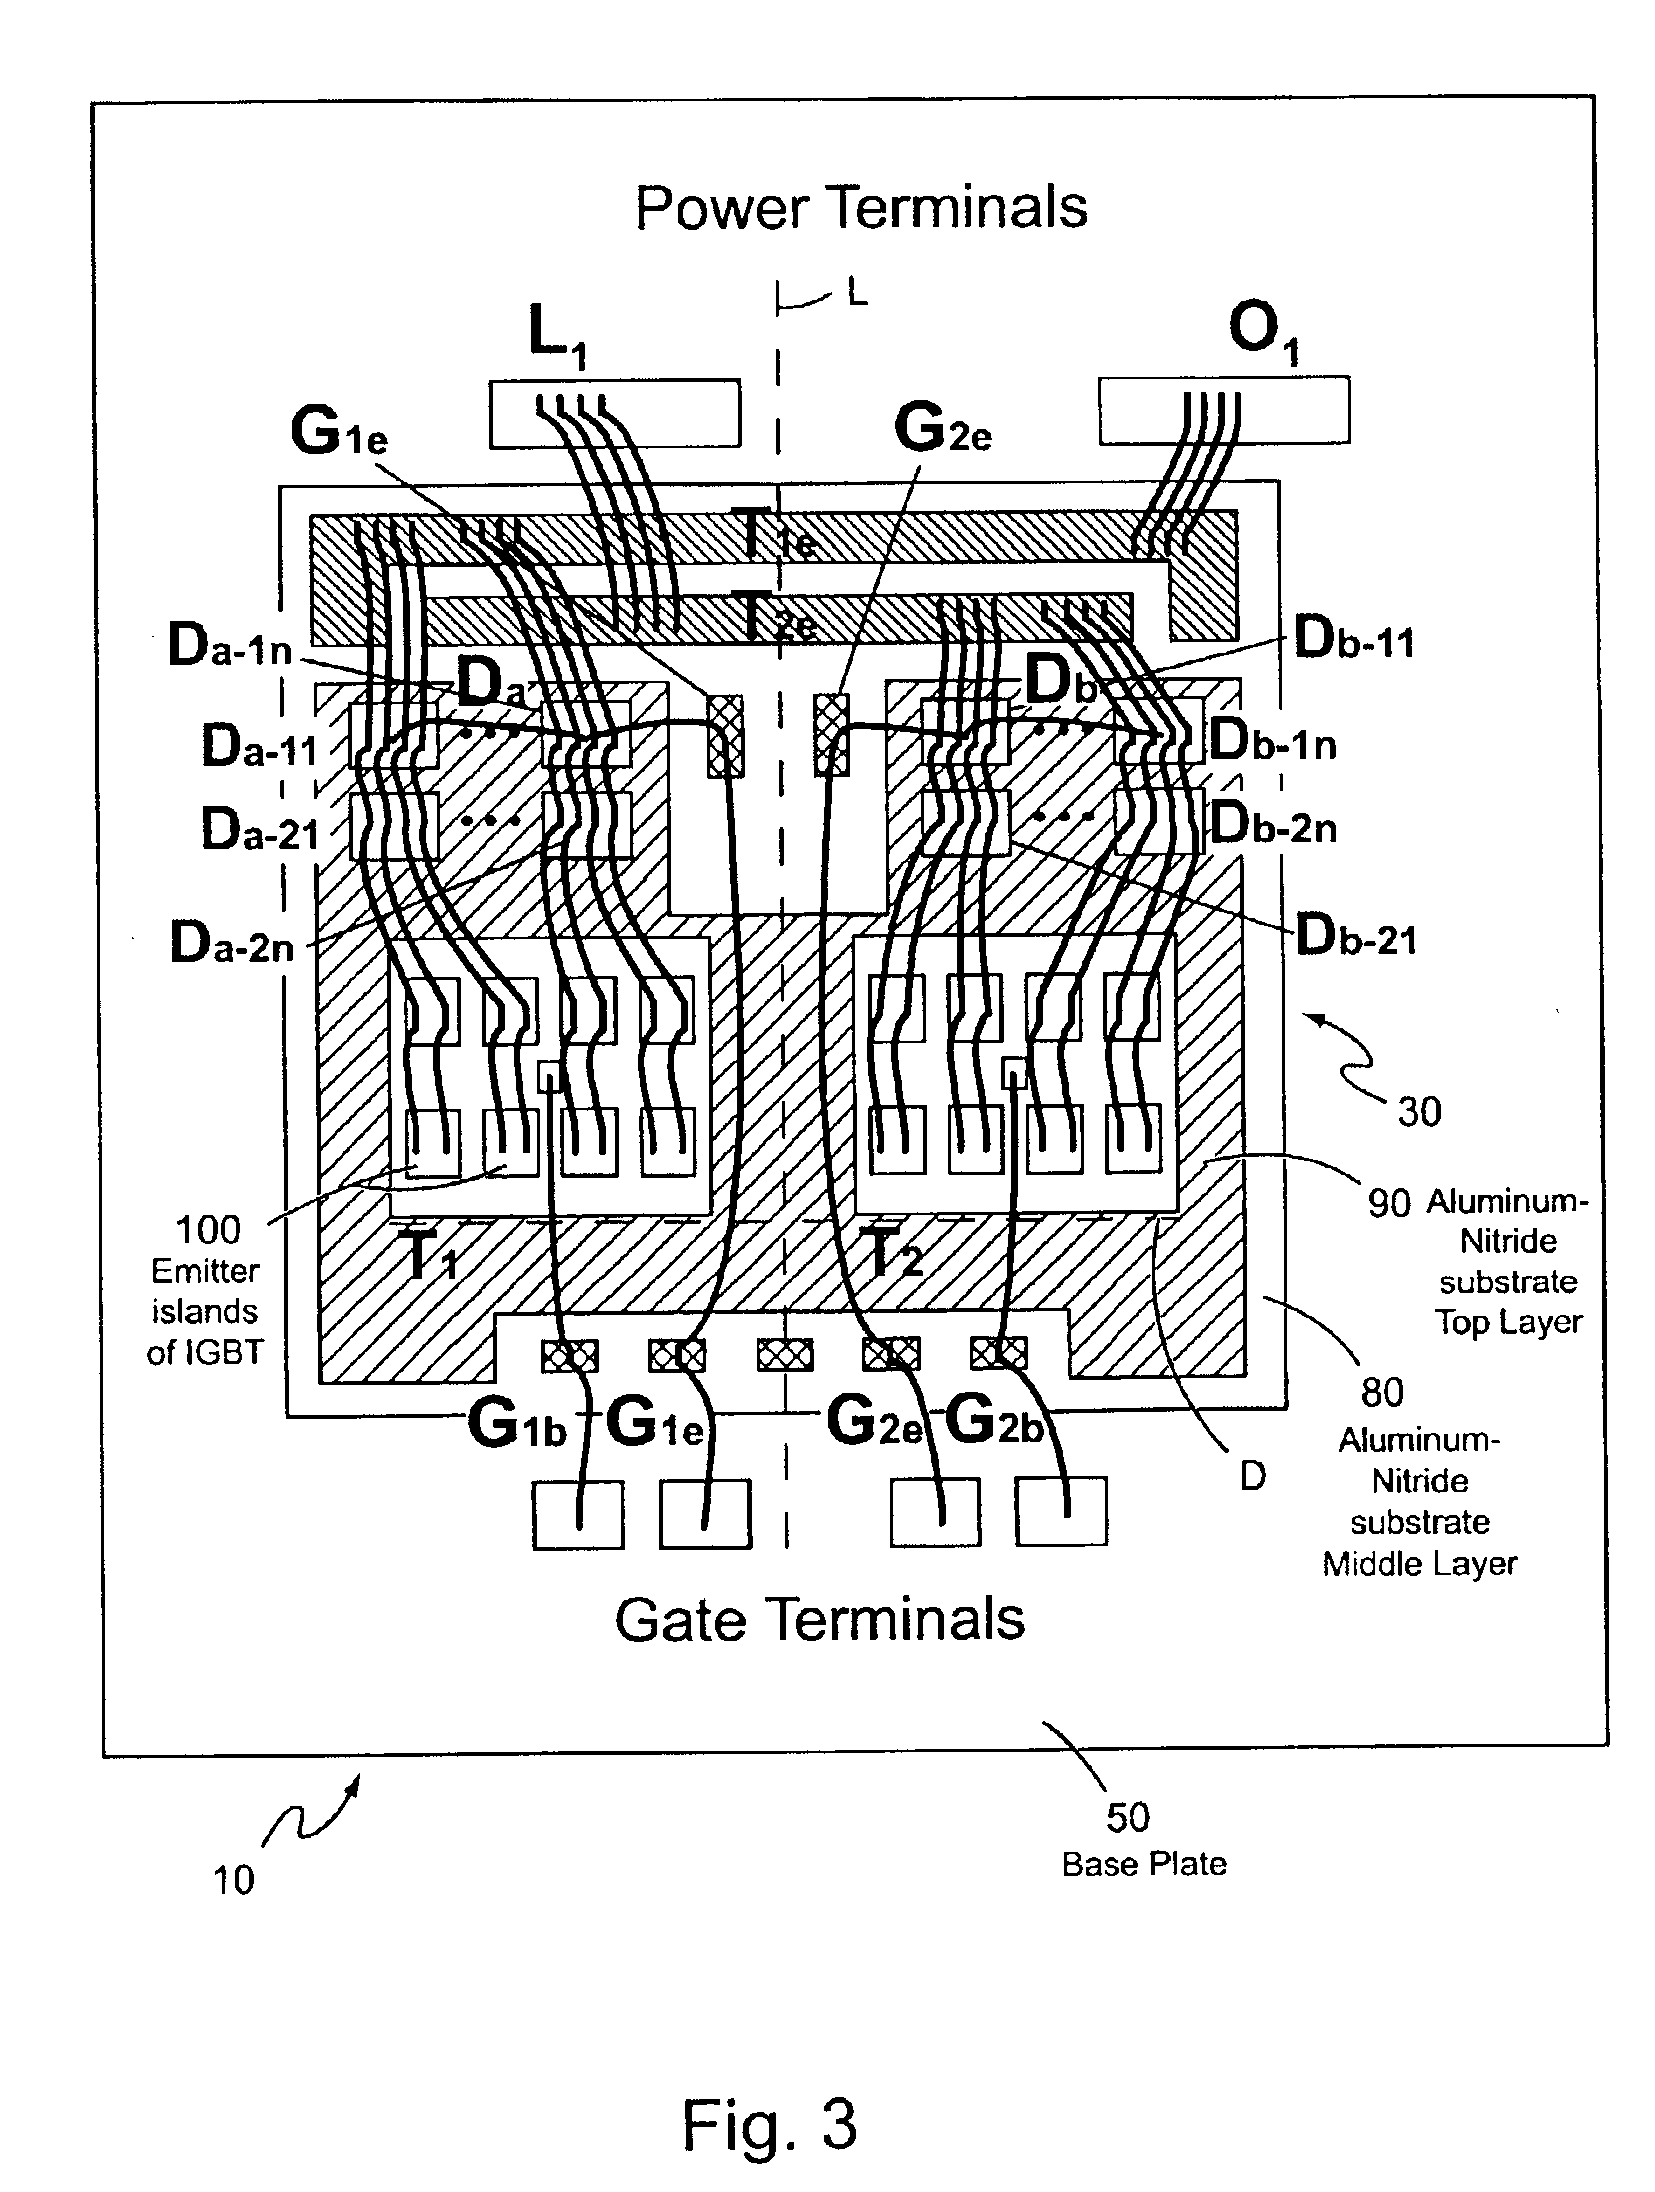 High-power, integrated AC switch module with distributed array of hybrid devices